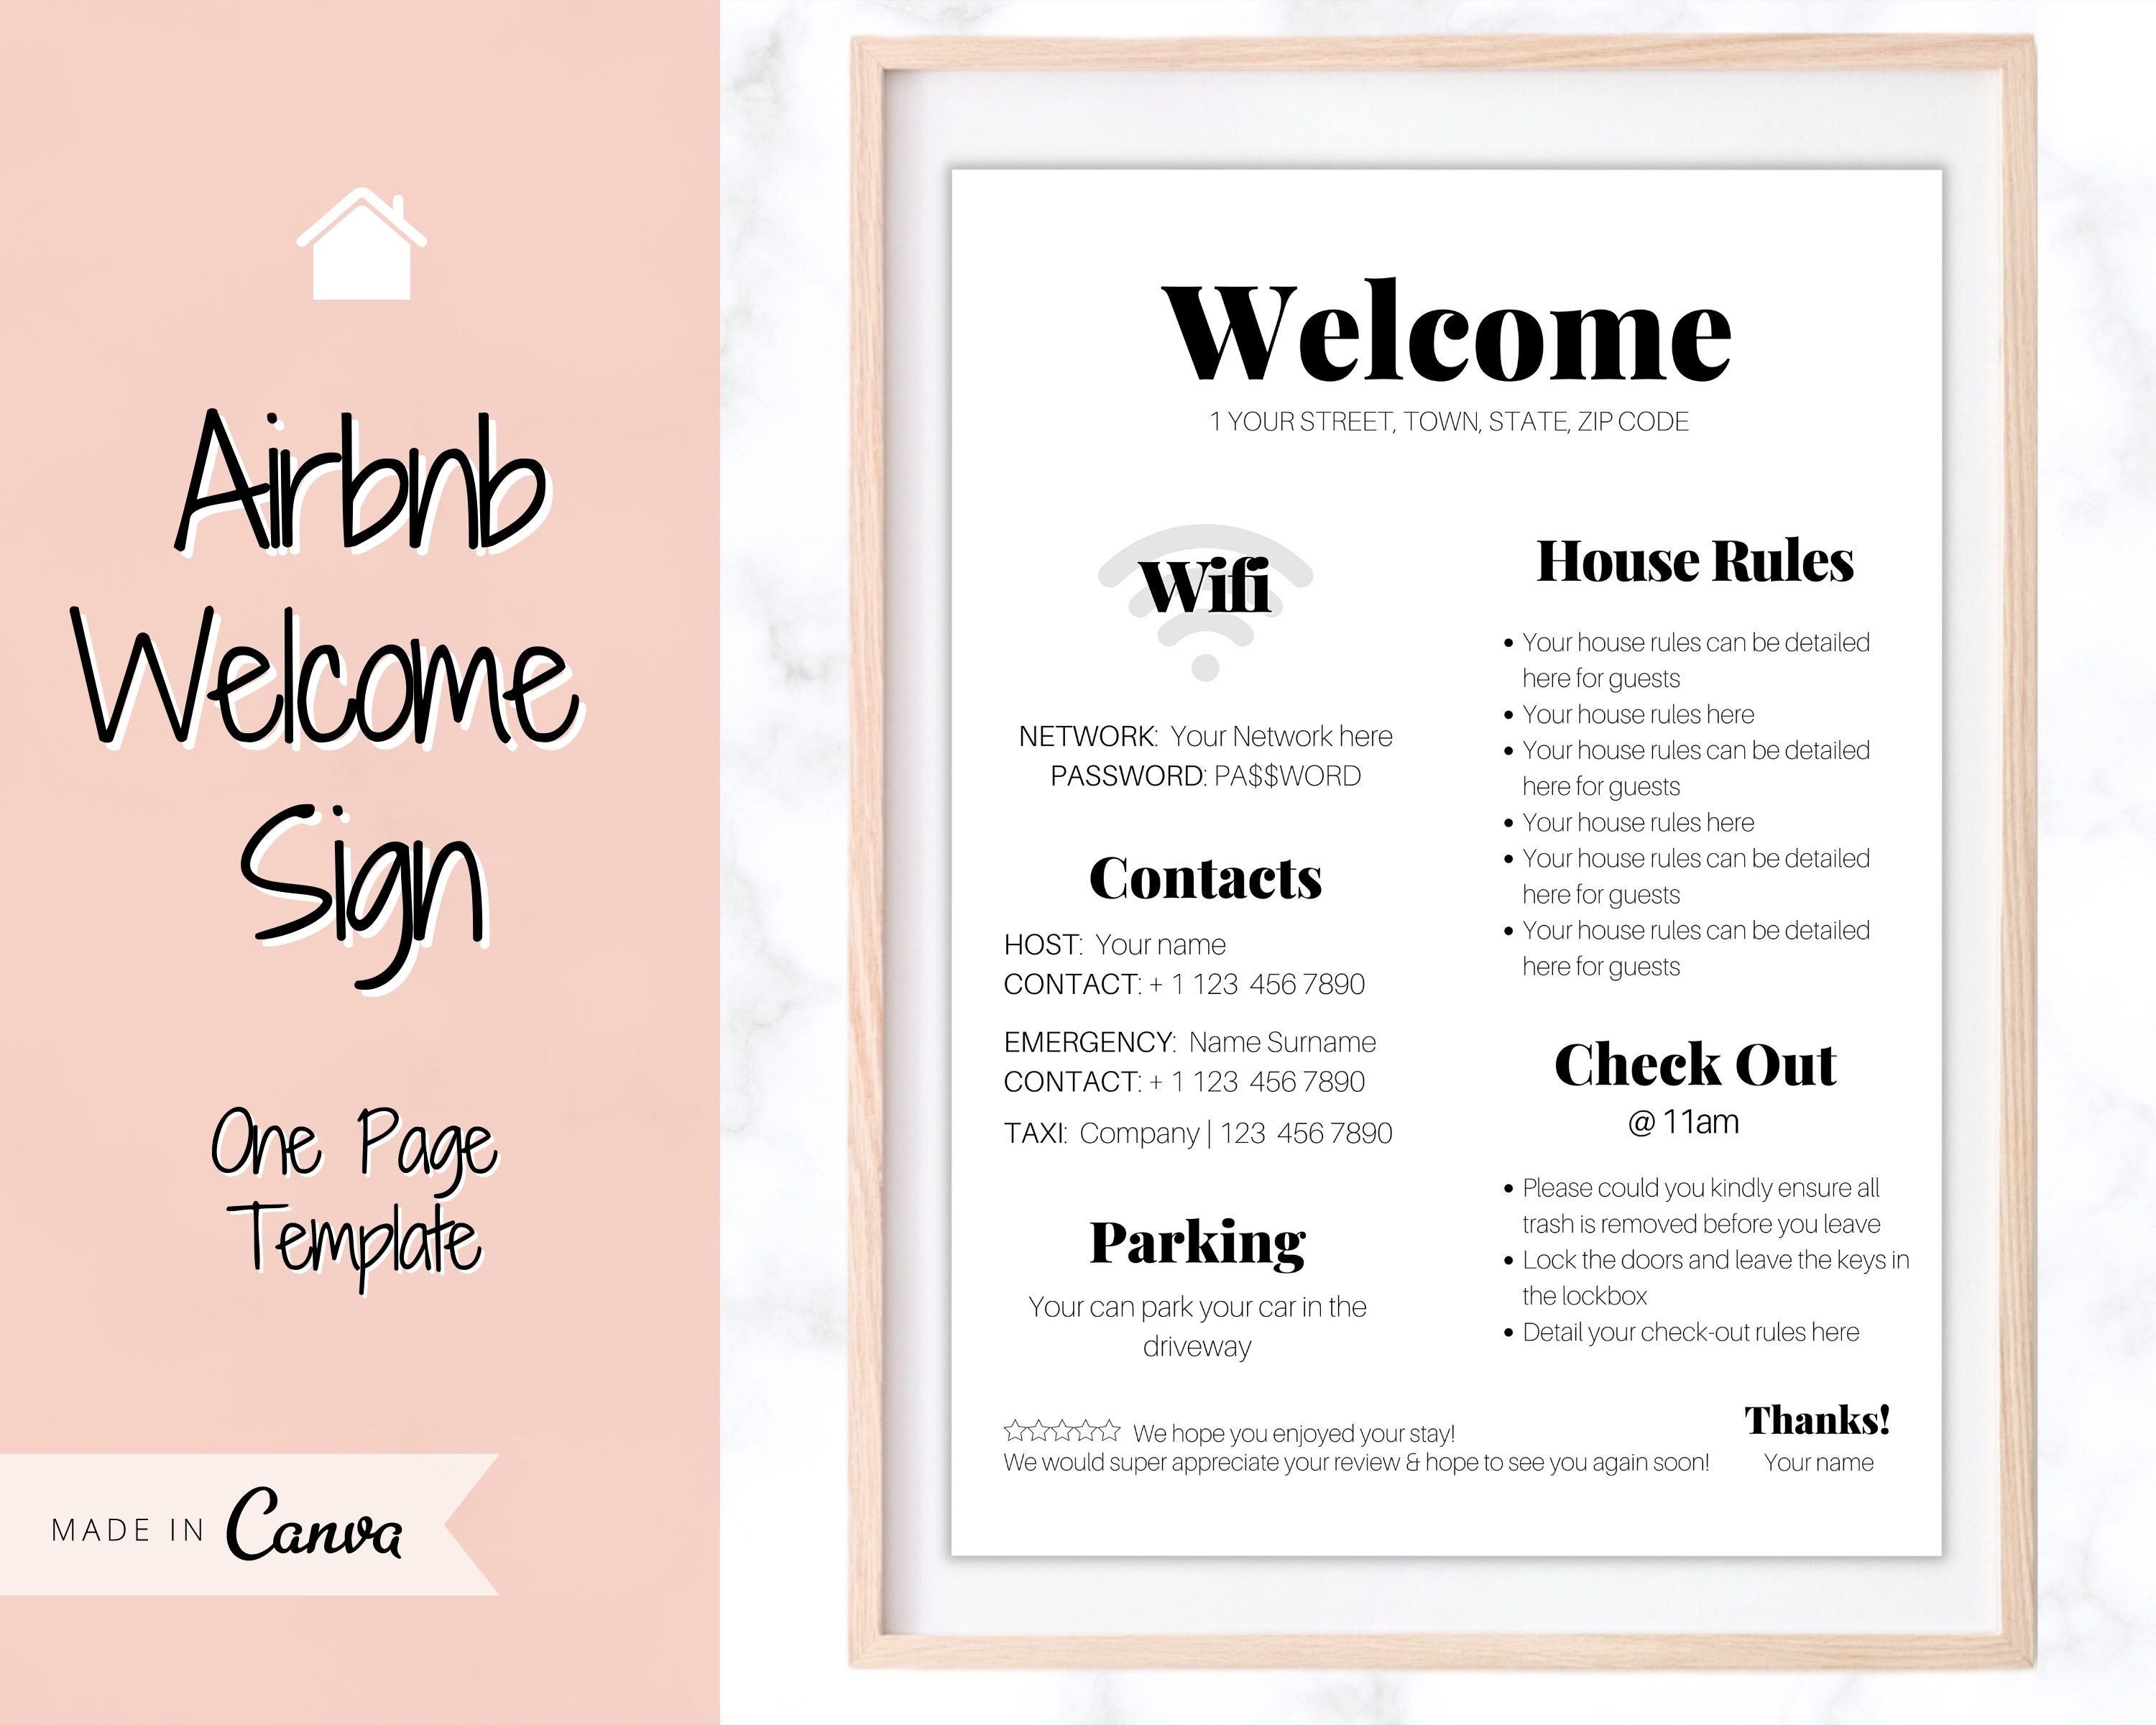 paper-design-templates-welcome-guide-airbnb-editable-airbnb-welcome